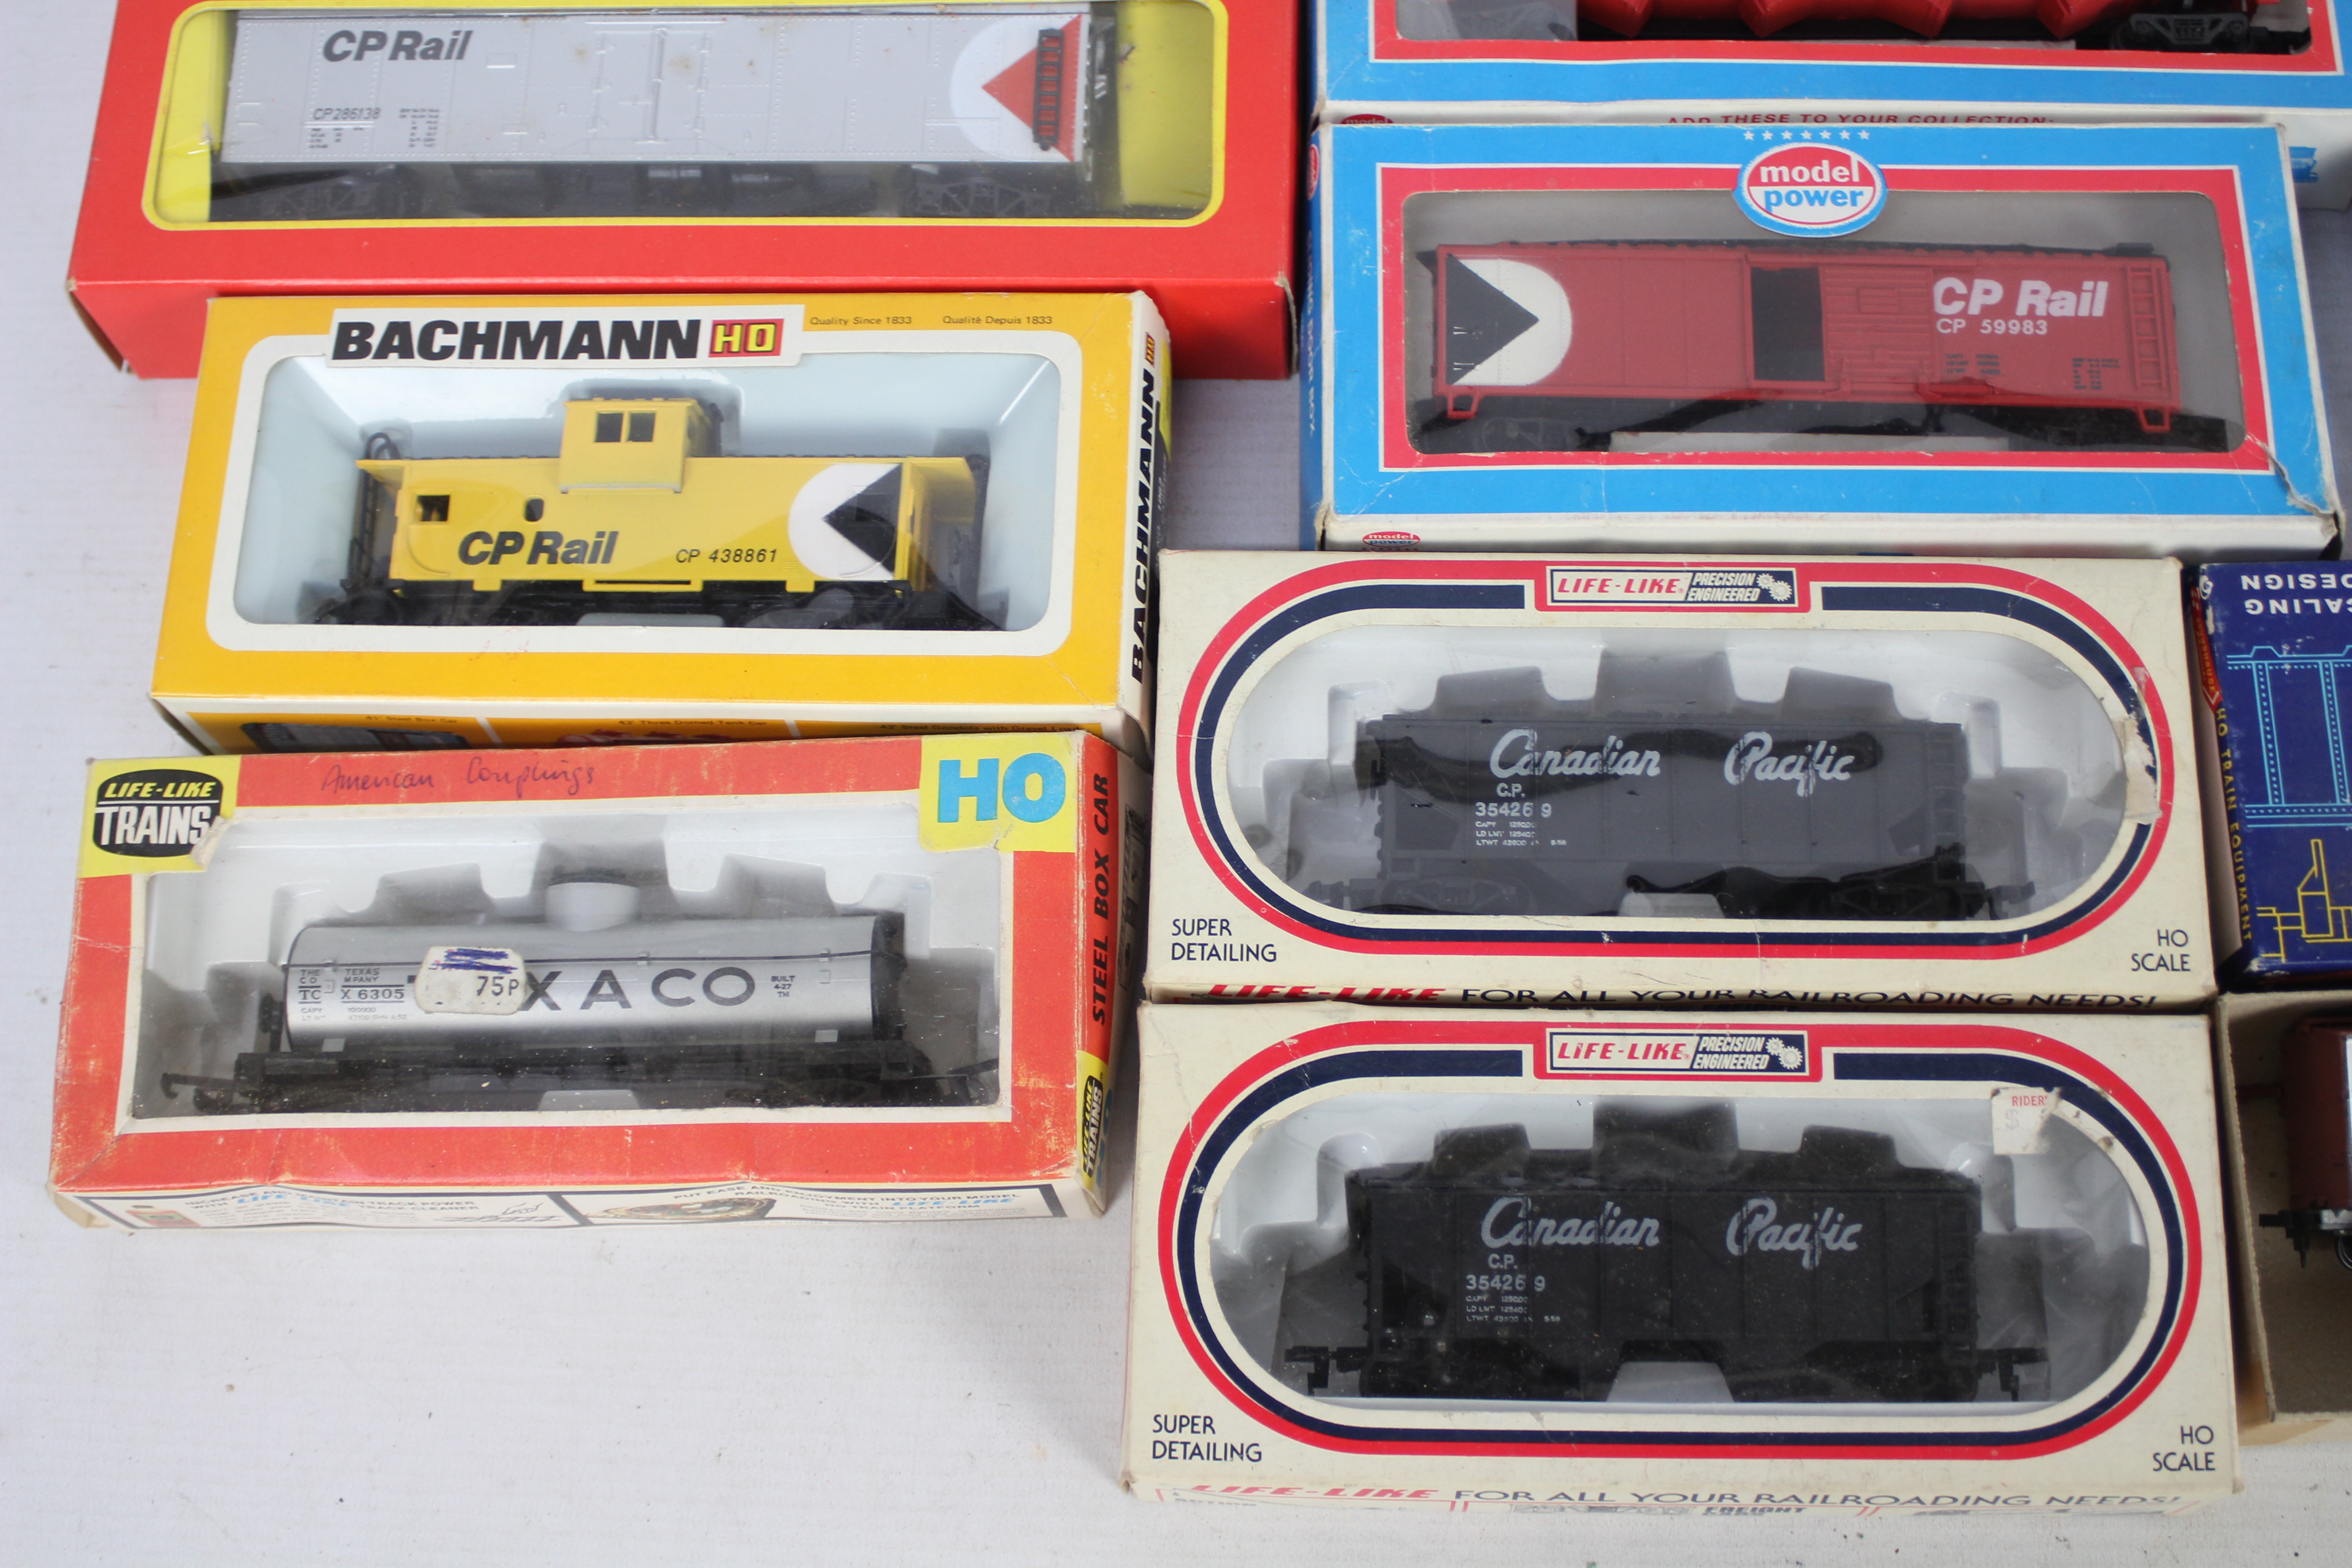 Bachmann - Hornby - Roundhouse - 15 x HO Gauge wagons mostly in CP Rail livery including 50 foot - Image 2 of 5